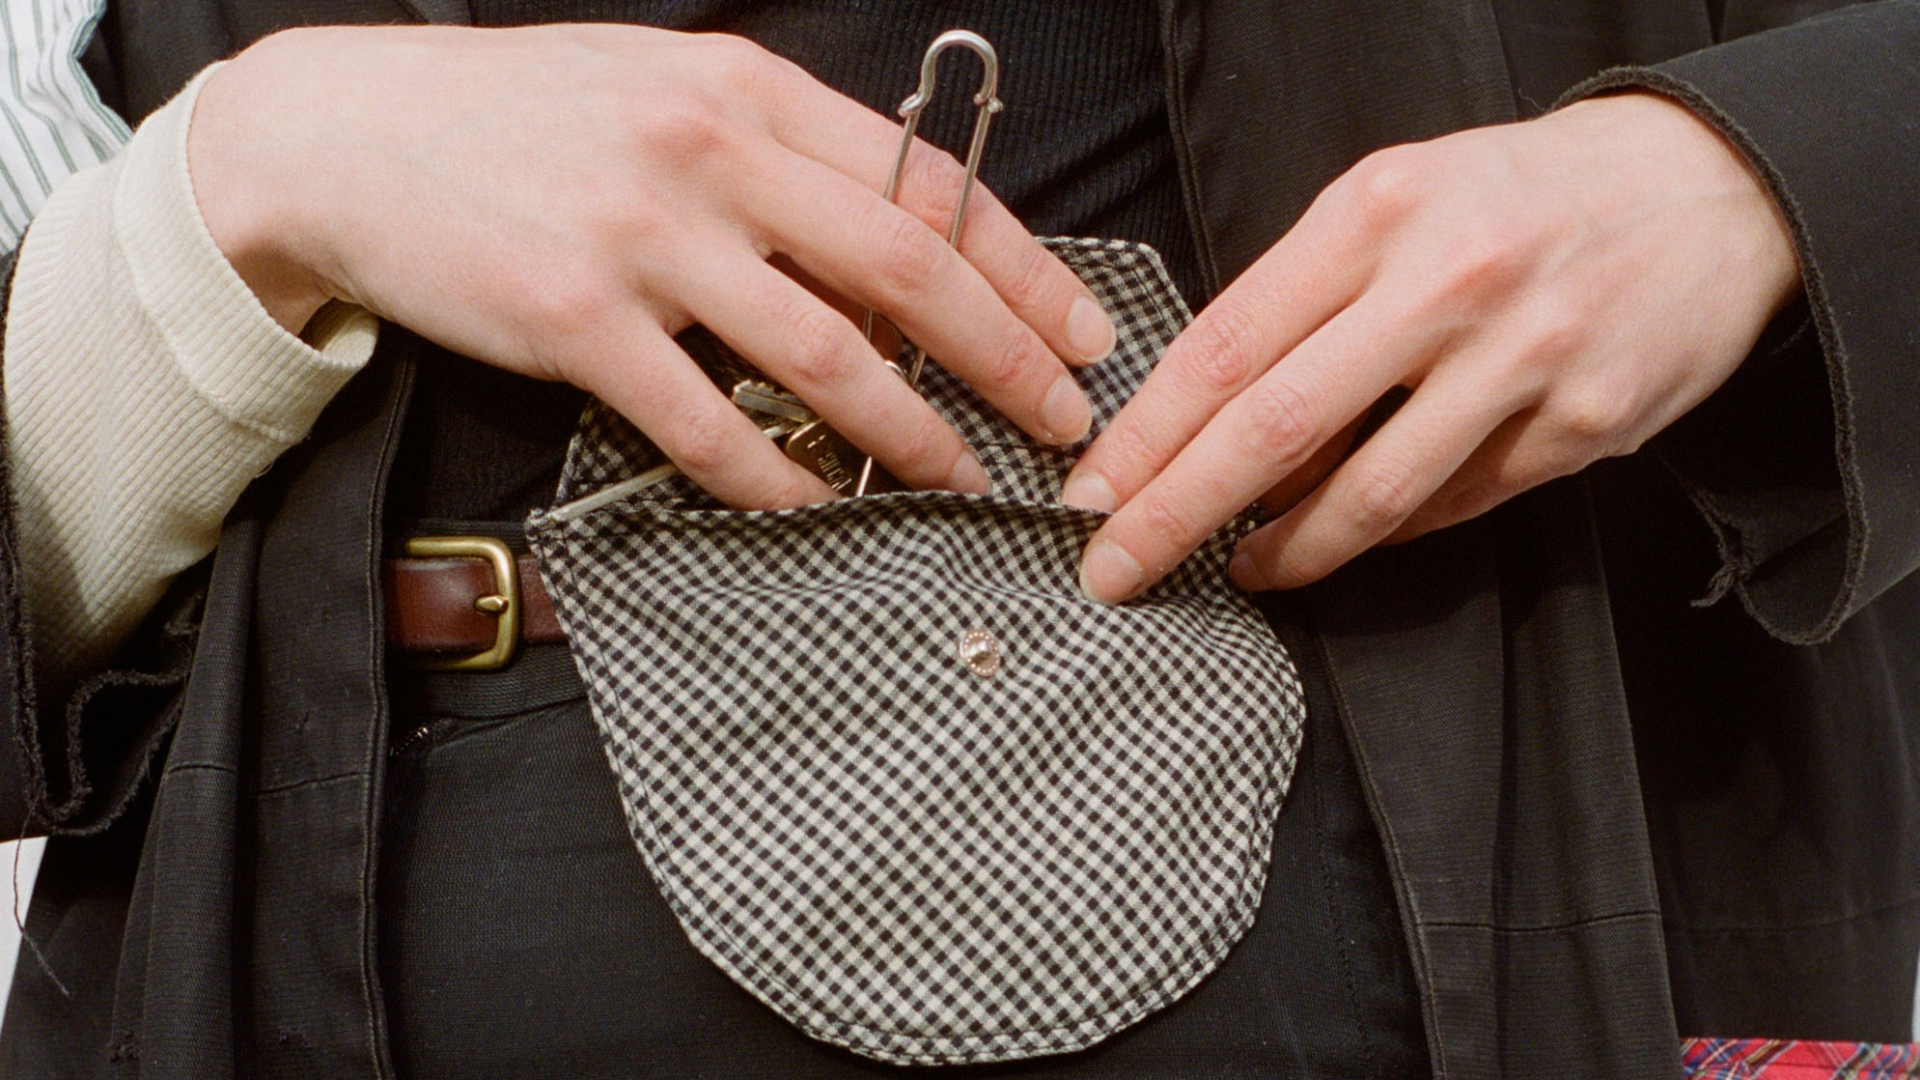 A close up of a women wearing a black and white check Future Archive attachable pocket bag on a brown leather belt over a black trousers and a black and white top. One hand is holding the pocket flap open and the other reaching in holding keys.